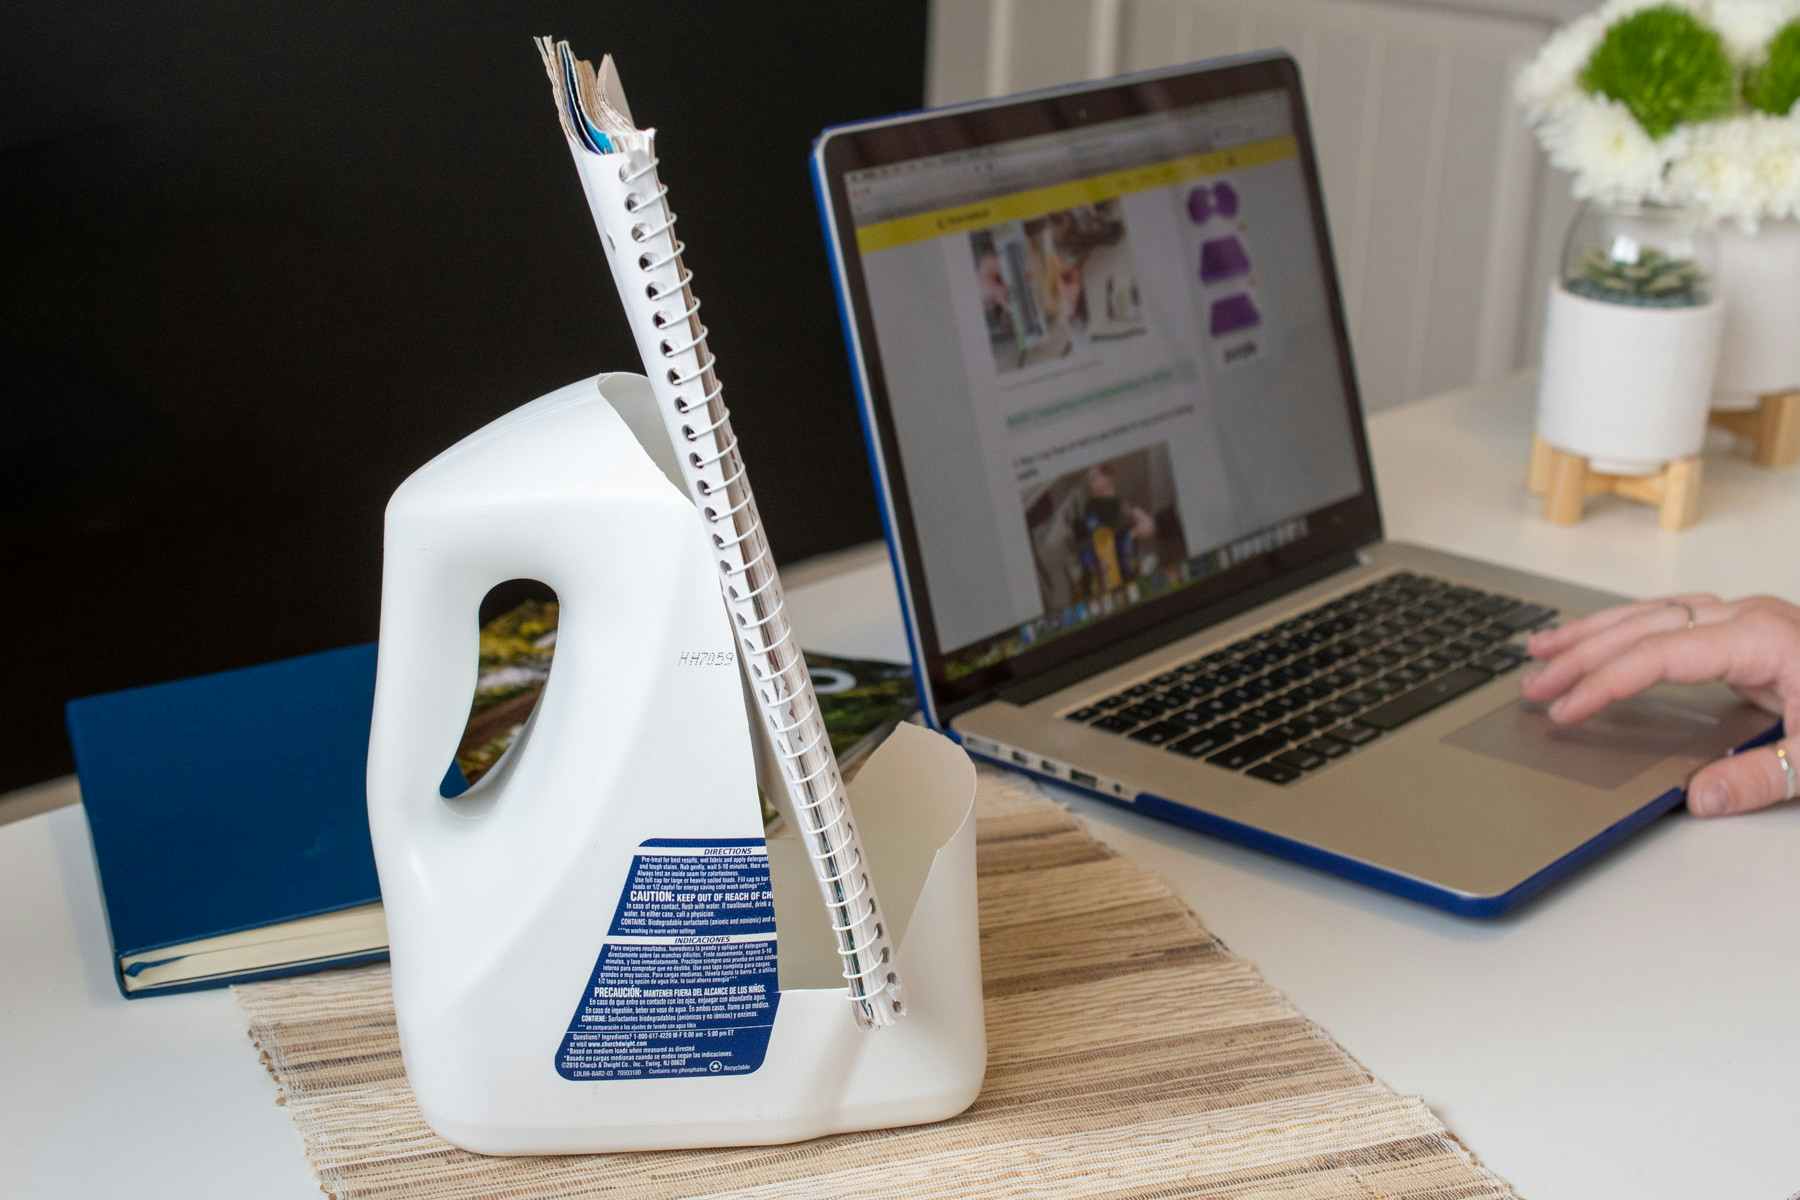 Reuse a laundry detergent bottle as a book stand.